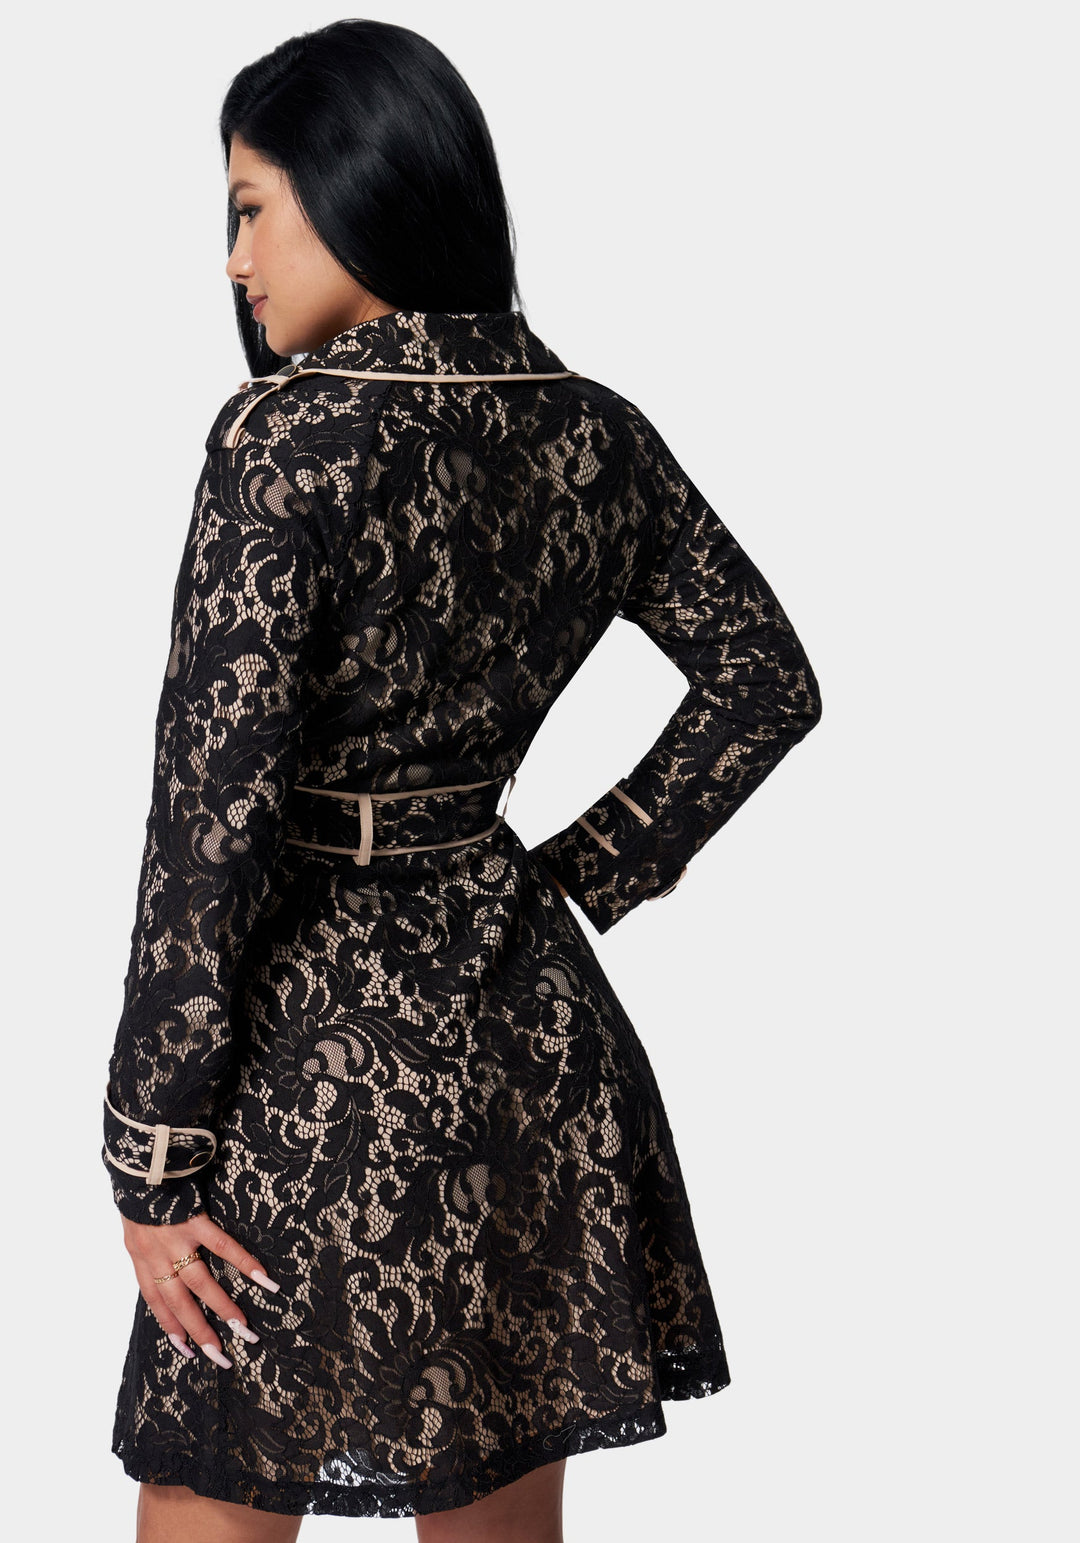 Black / Doeskin Lace Double Breast Contrast Trim Trench Coat